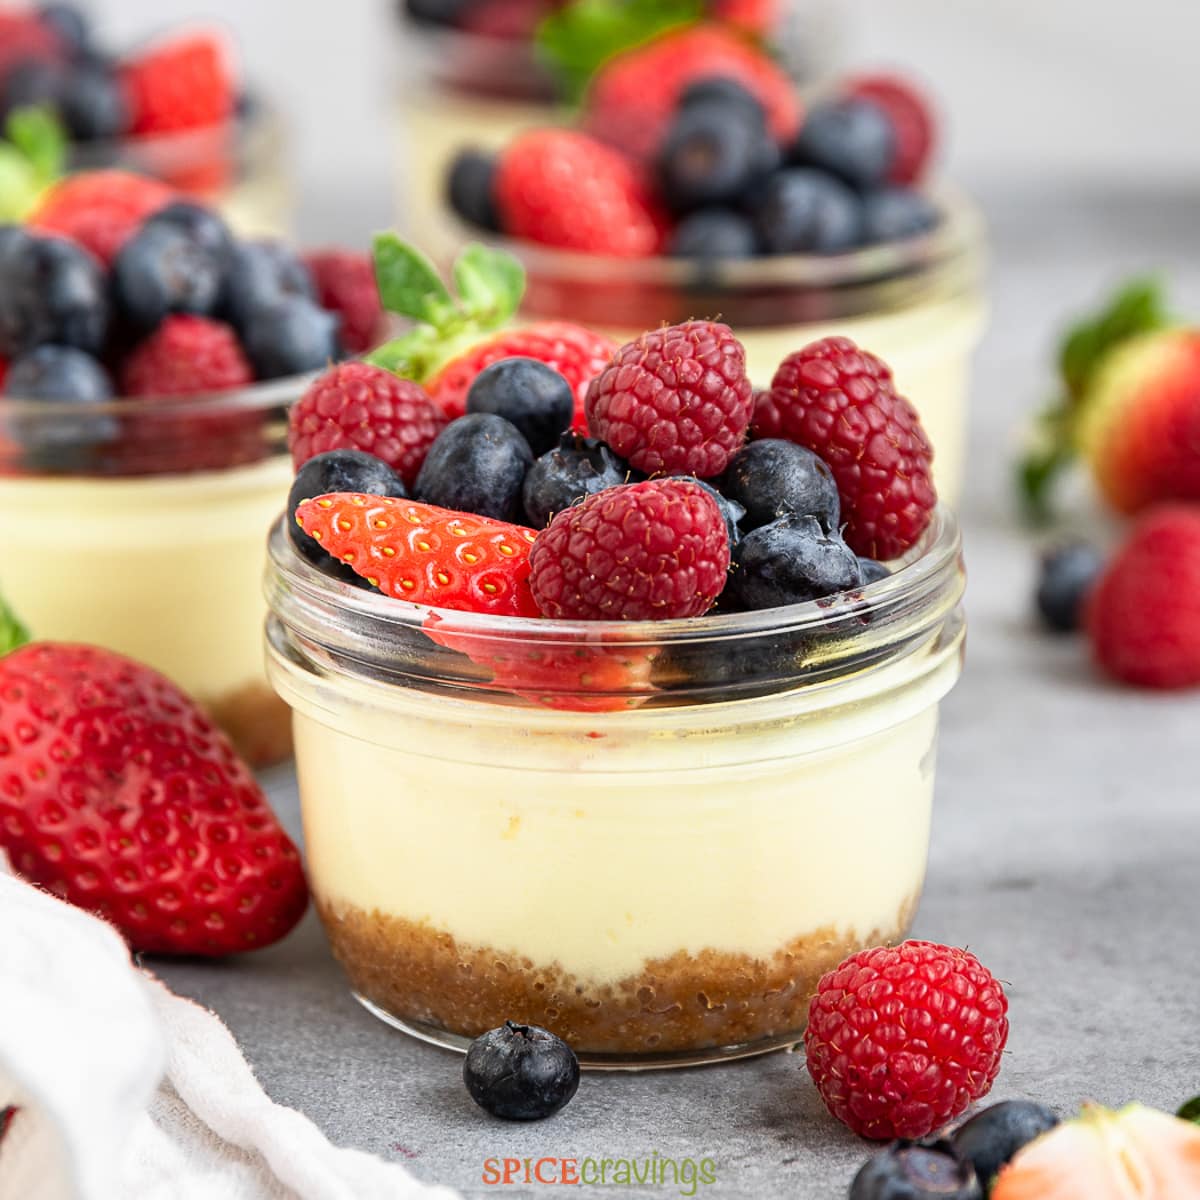 https://spicecravings.com/wp-content/uploads/2022/02/Instant-Pot-Cheesecake-Bites-Featured.jpg